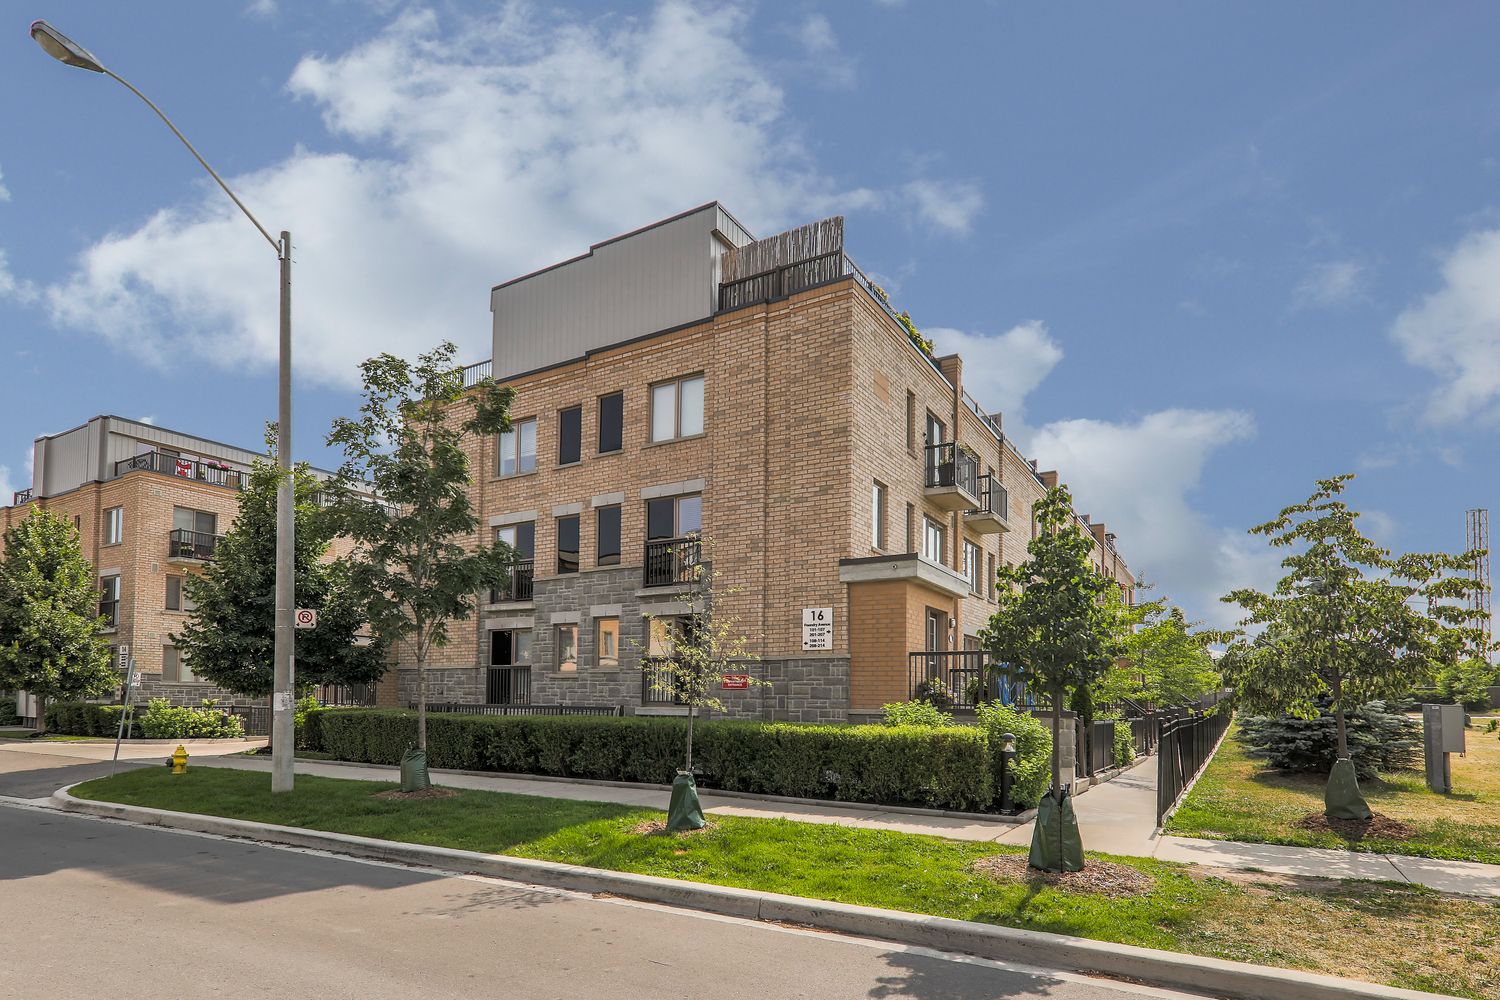 6-16 Foundry Avenue. 6-16 Foundry Avenue Townhomes is located in  West End, Toronto - image #2 of 5